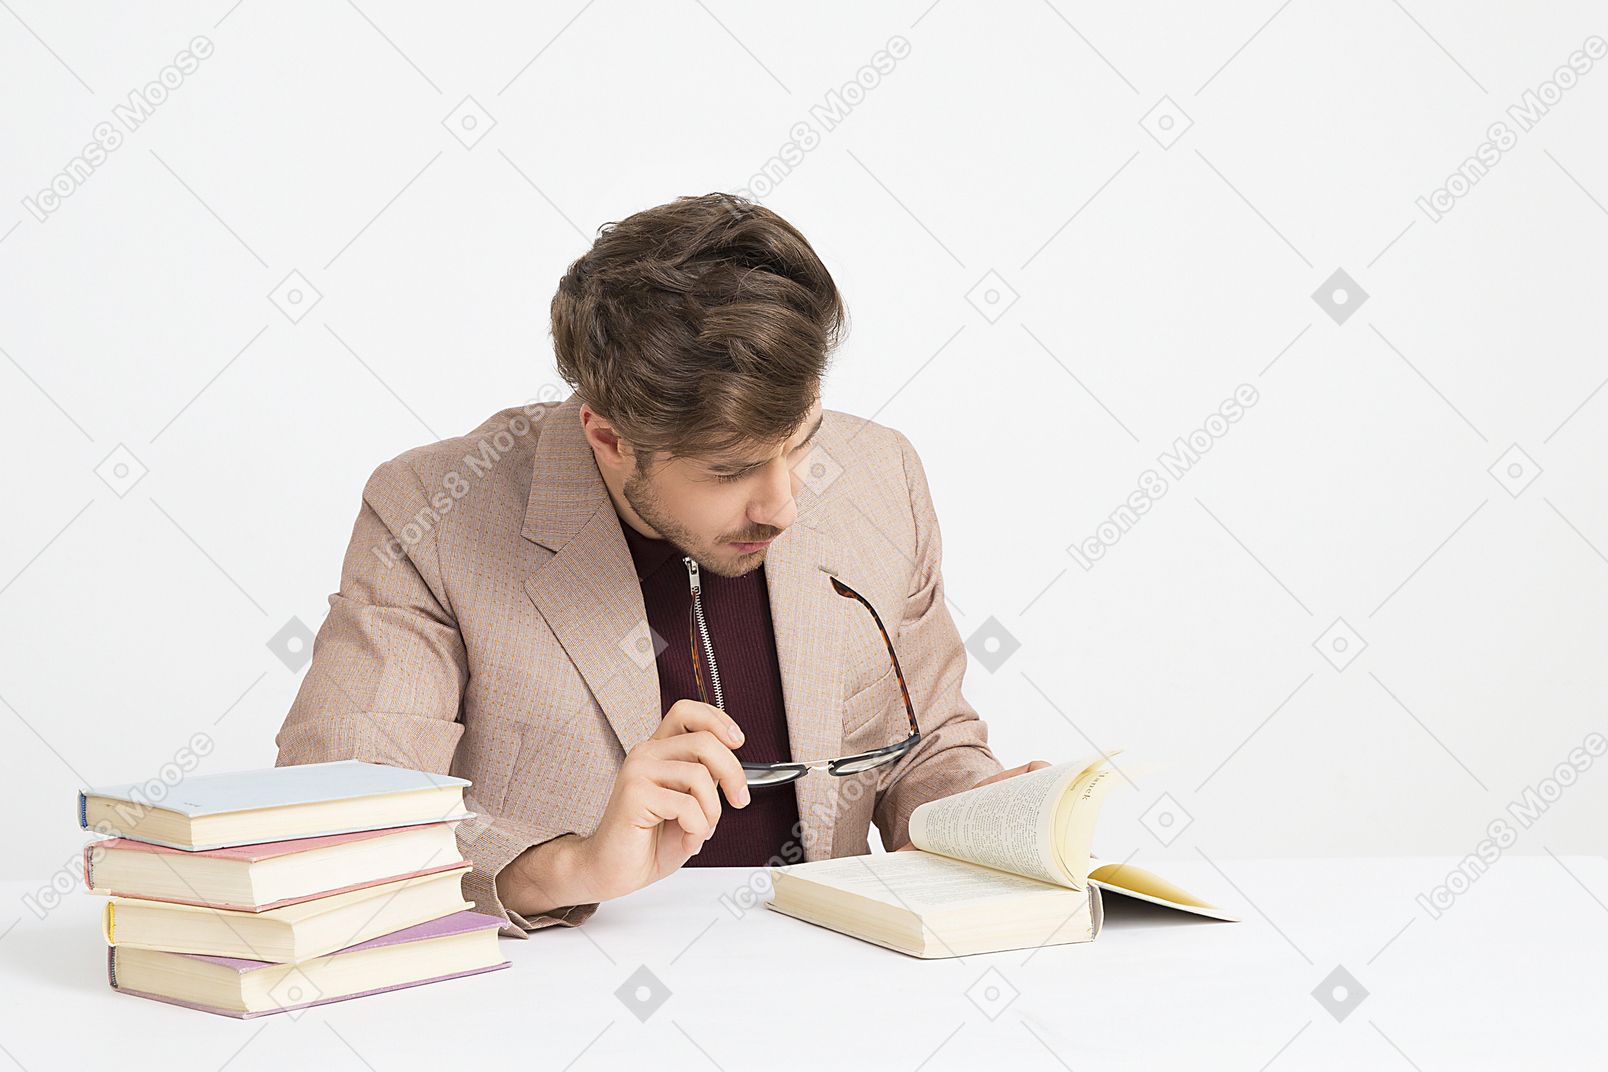 Handsome young man holding his glasses and reading a book